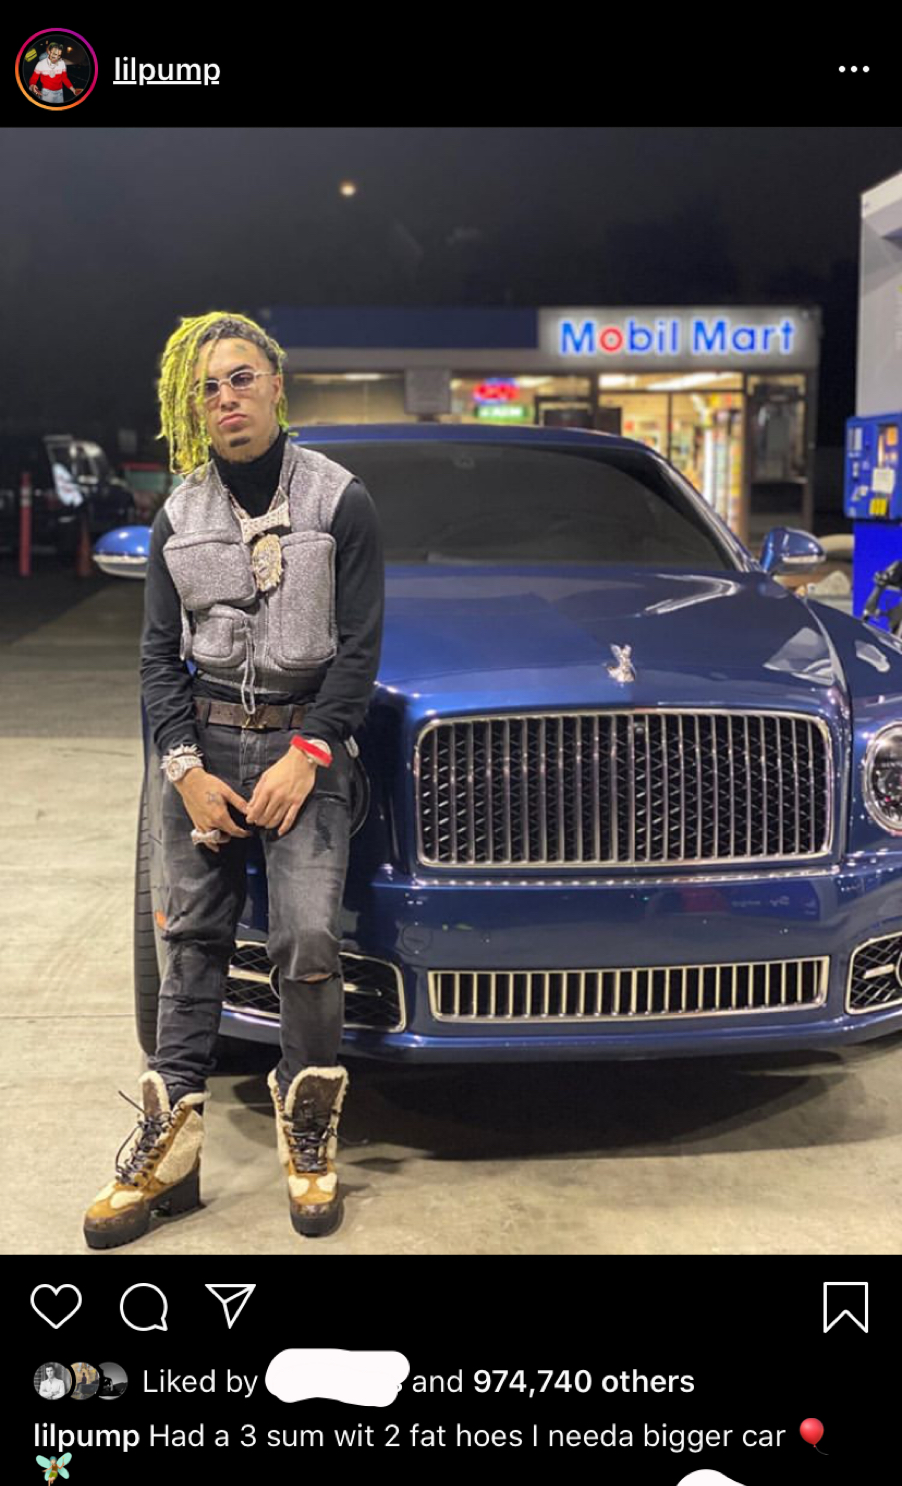 auto show - lilpump Mobil Mart Qv d by and 974,740 others lilpump Had a 3 sum wit 2 fat hoes I needa bigger car